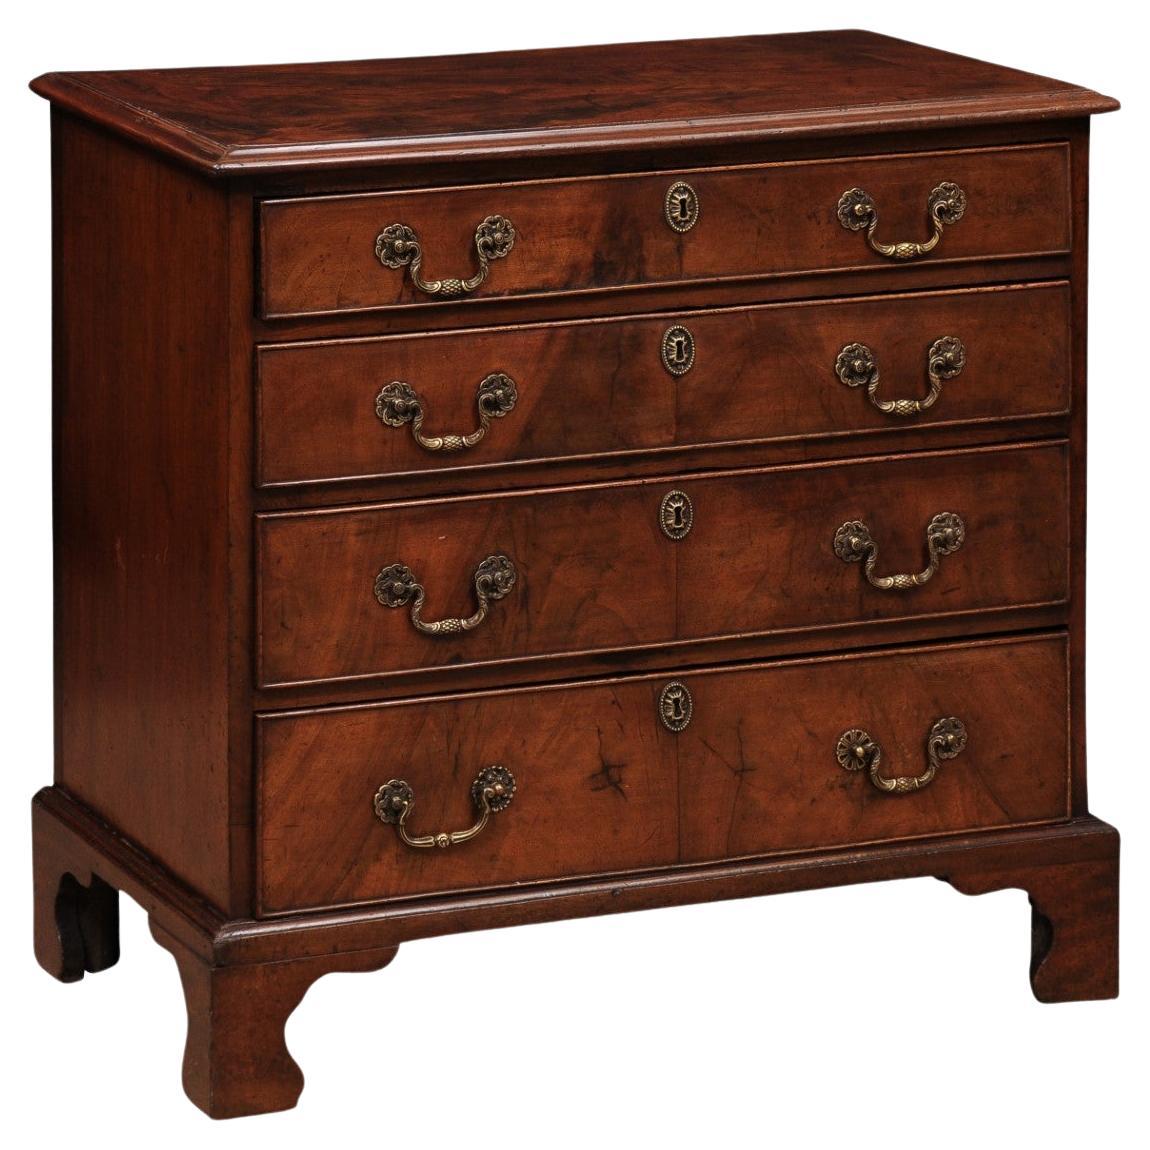 Small 18th Century English Mahogany Bachelor’s Chest with 4 Drawers and Bracket For Sale